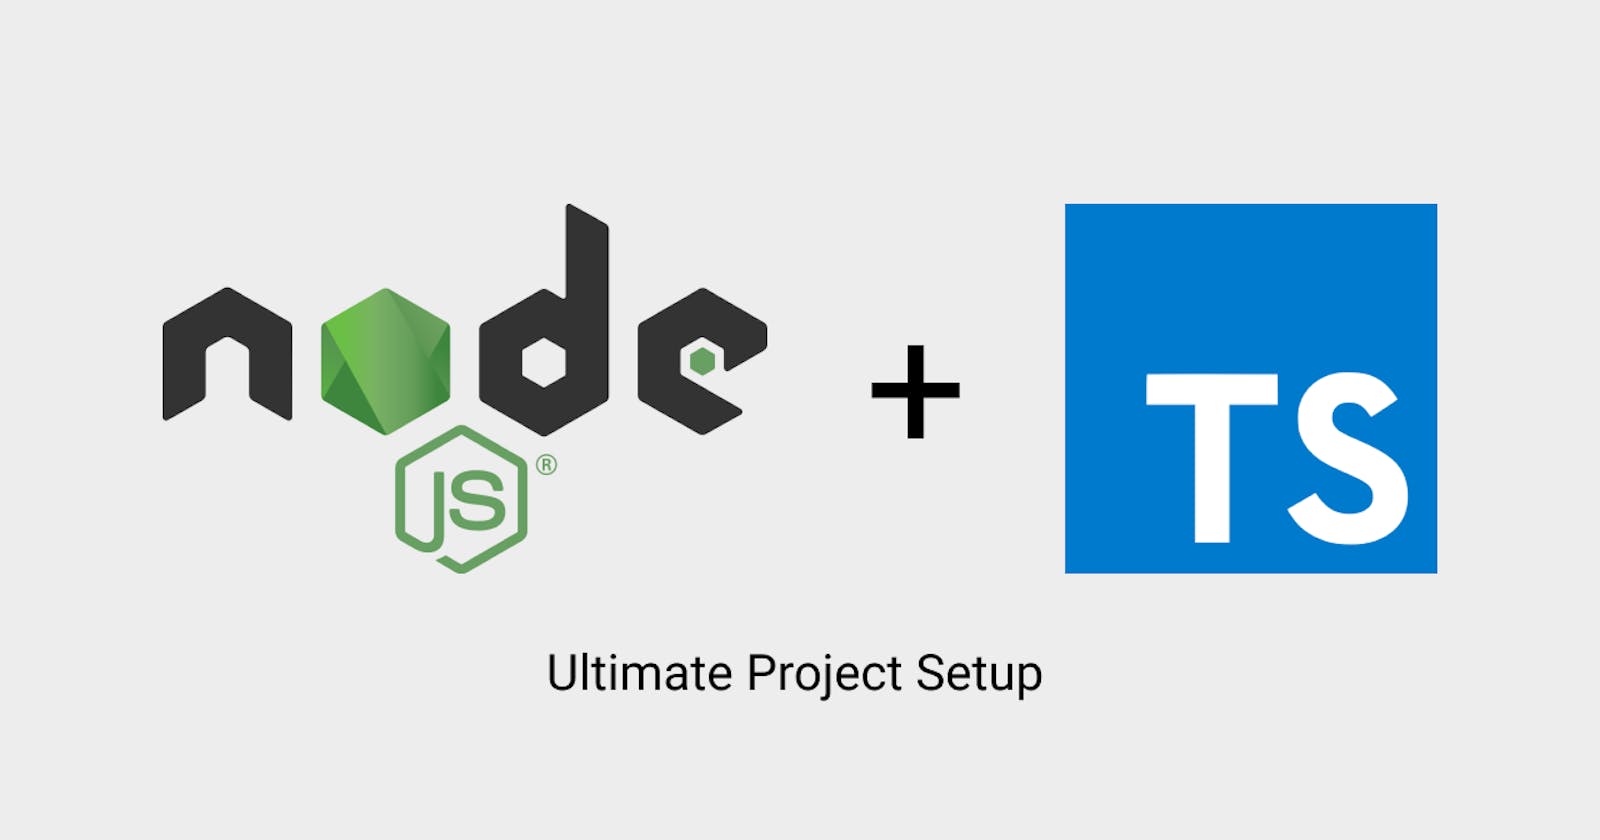 Setting up a nodejs project with typescript and deploying to heroku